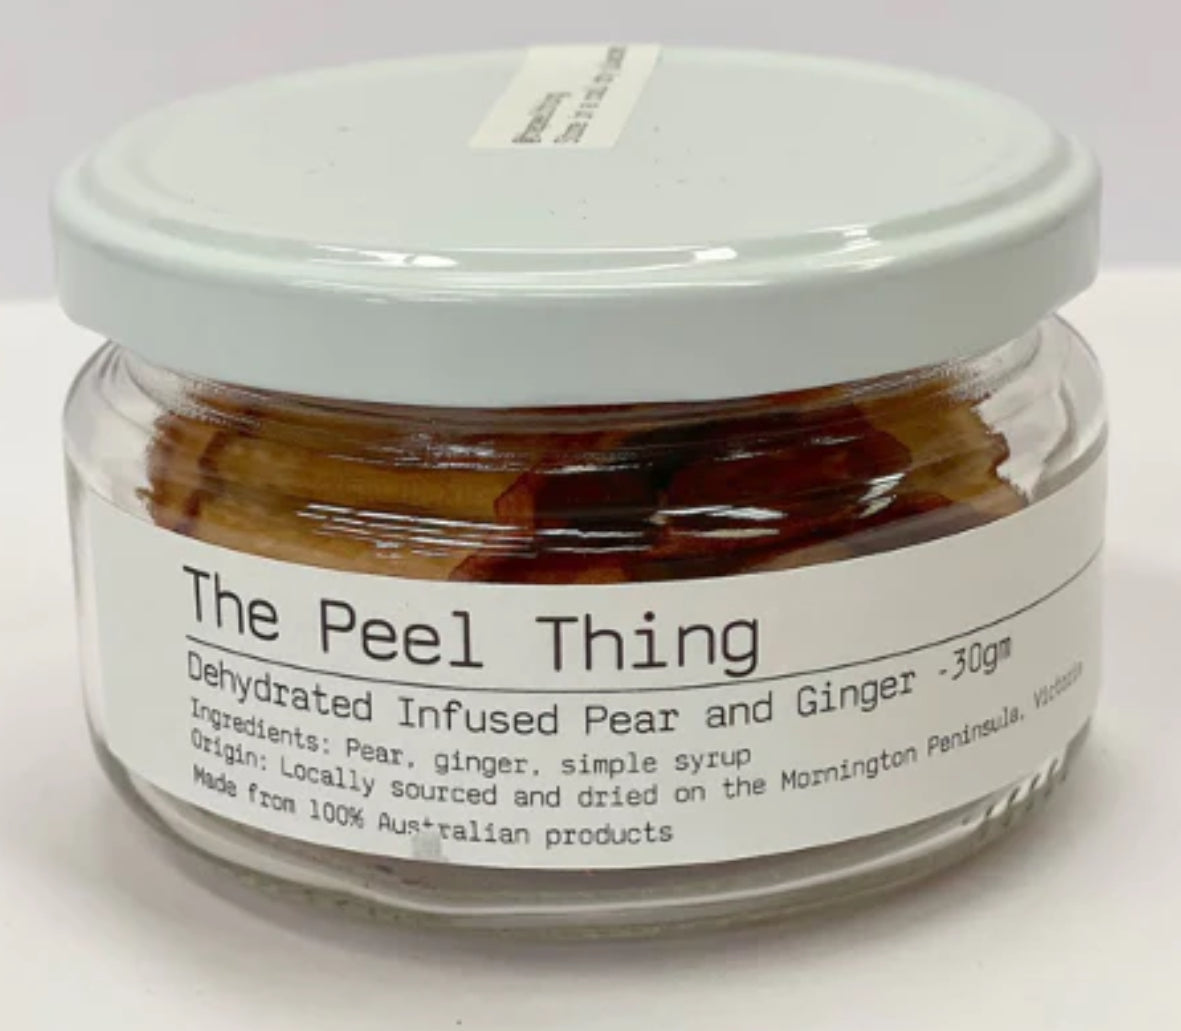 The Peel Thing Dehydrated Infused Pear & Ginger